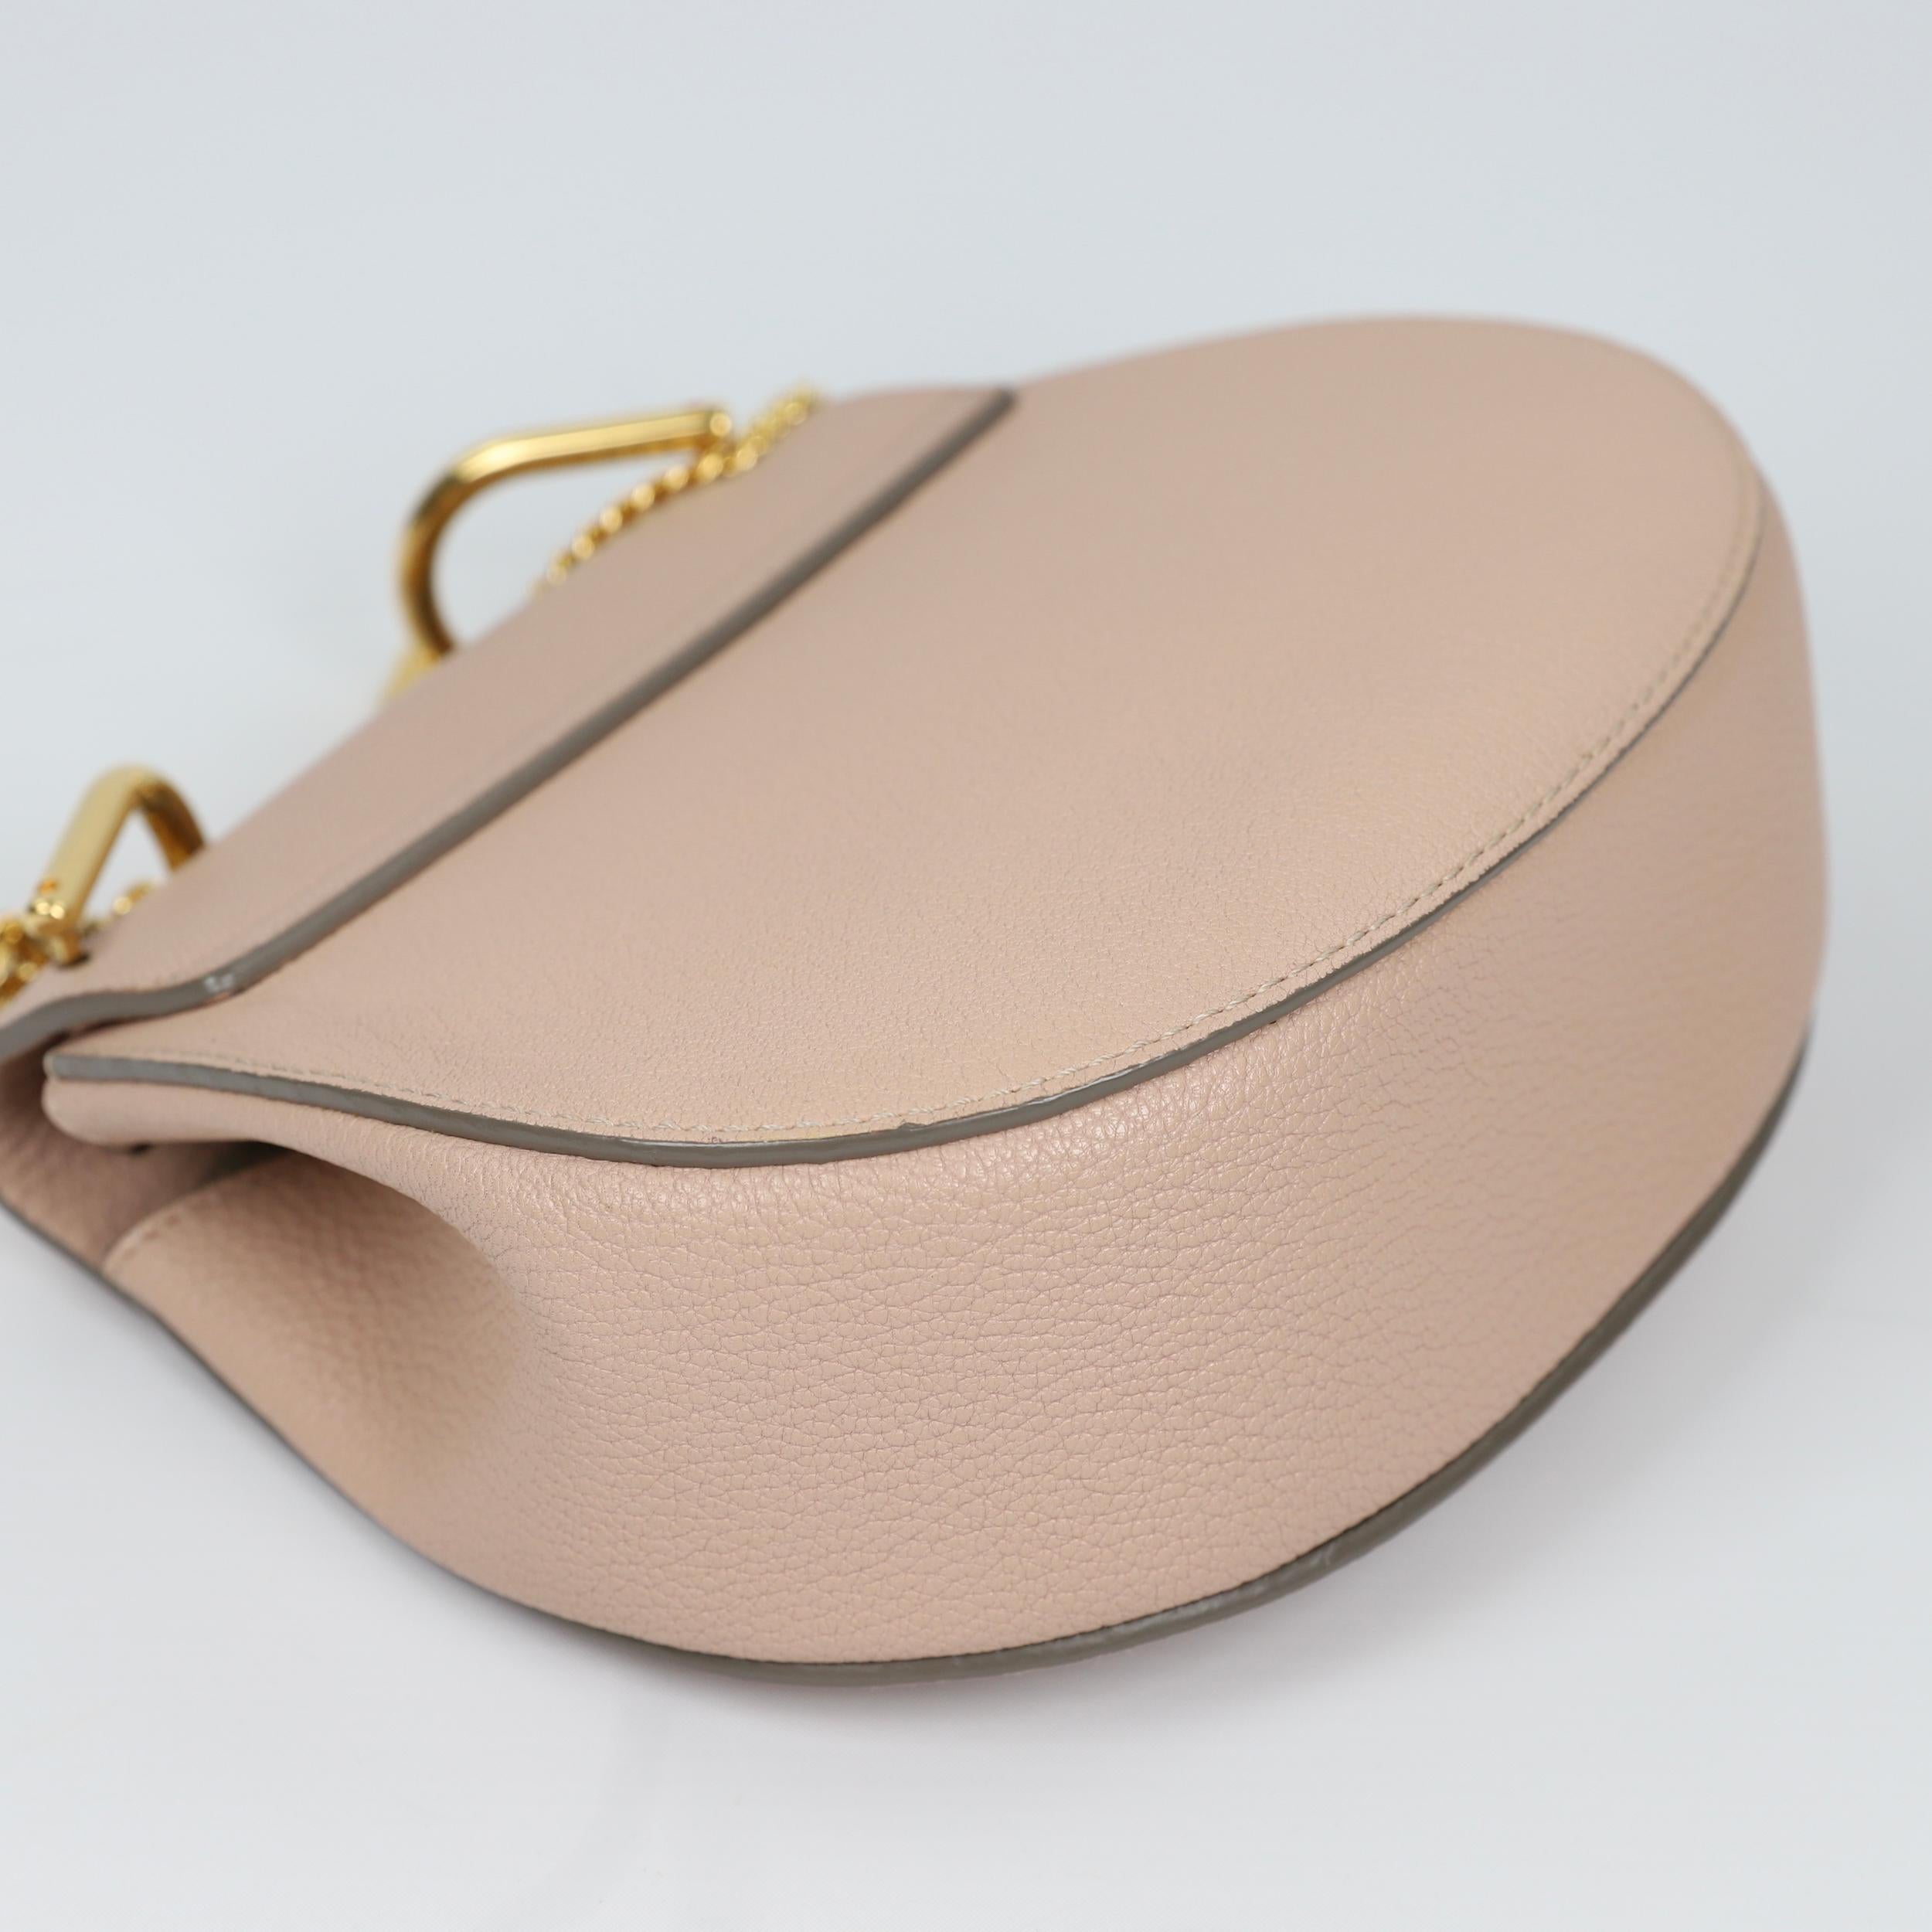 Chloé Drew leather handbag In Excellent Condition For Sale In Rīga, LV